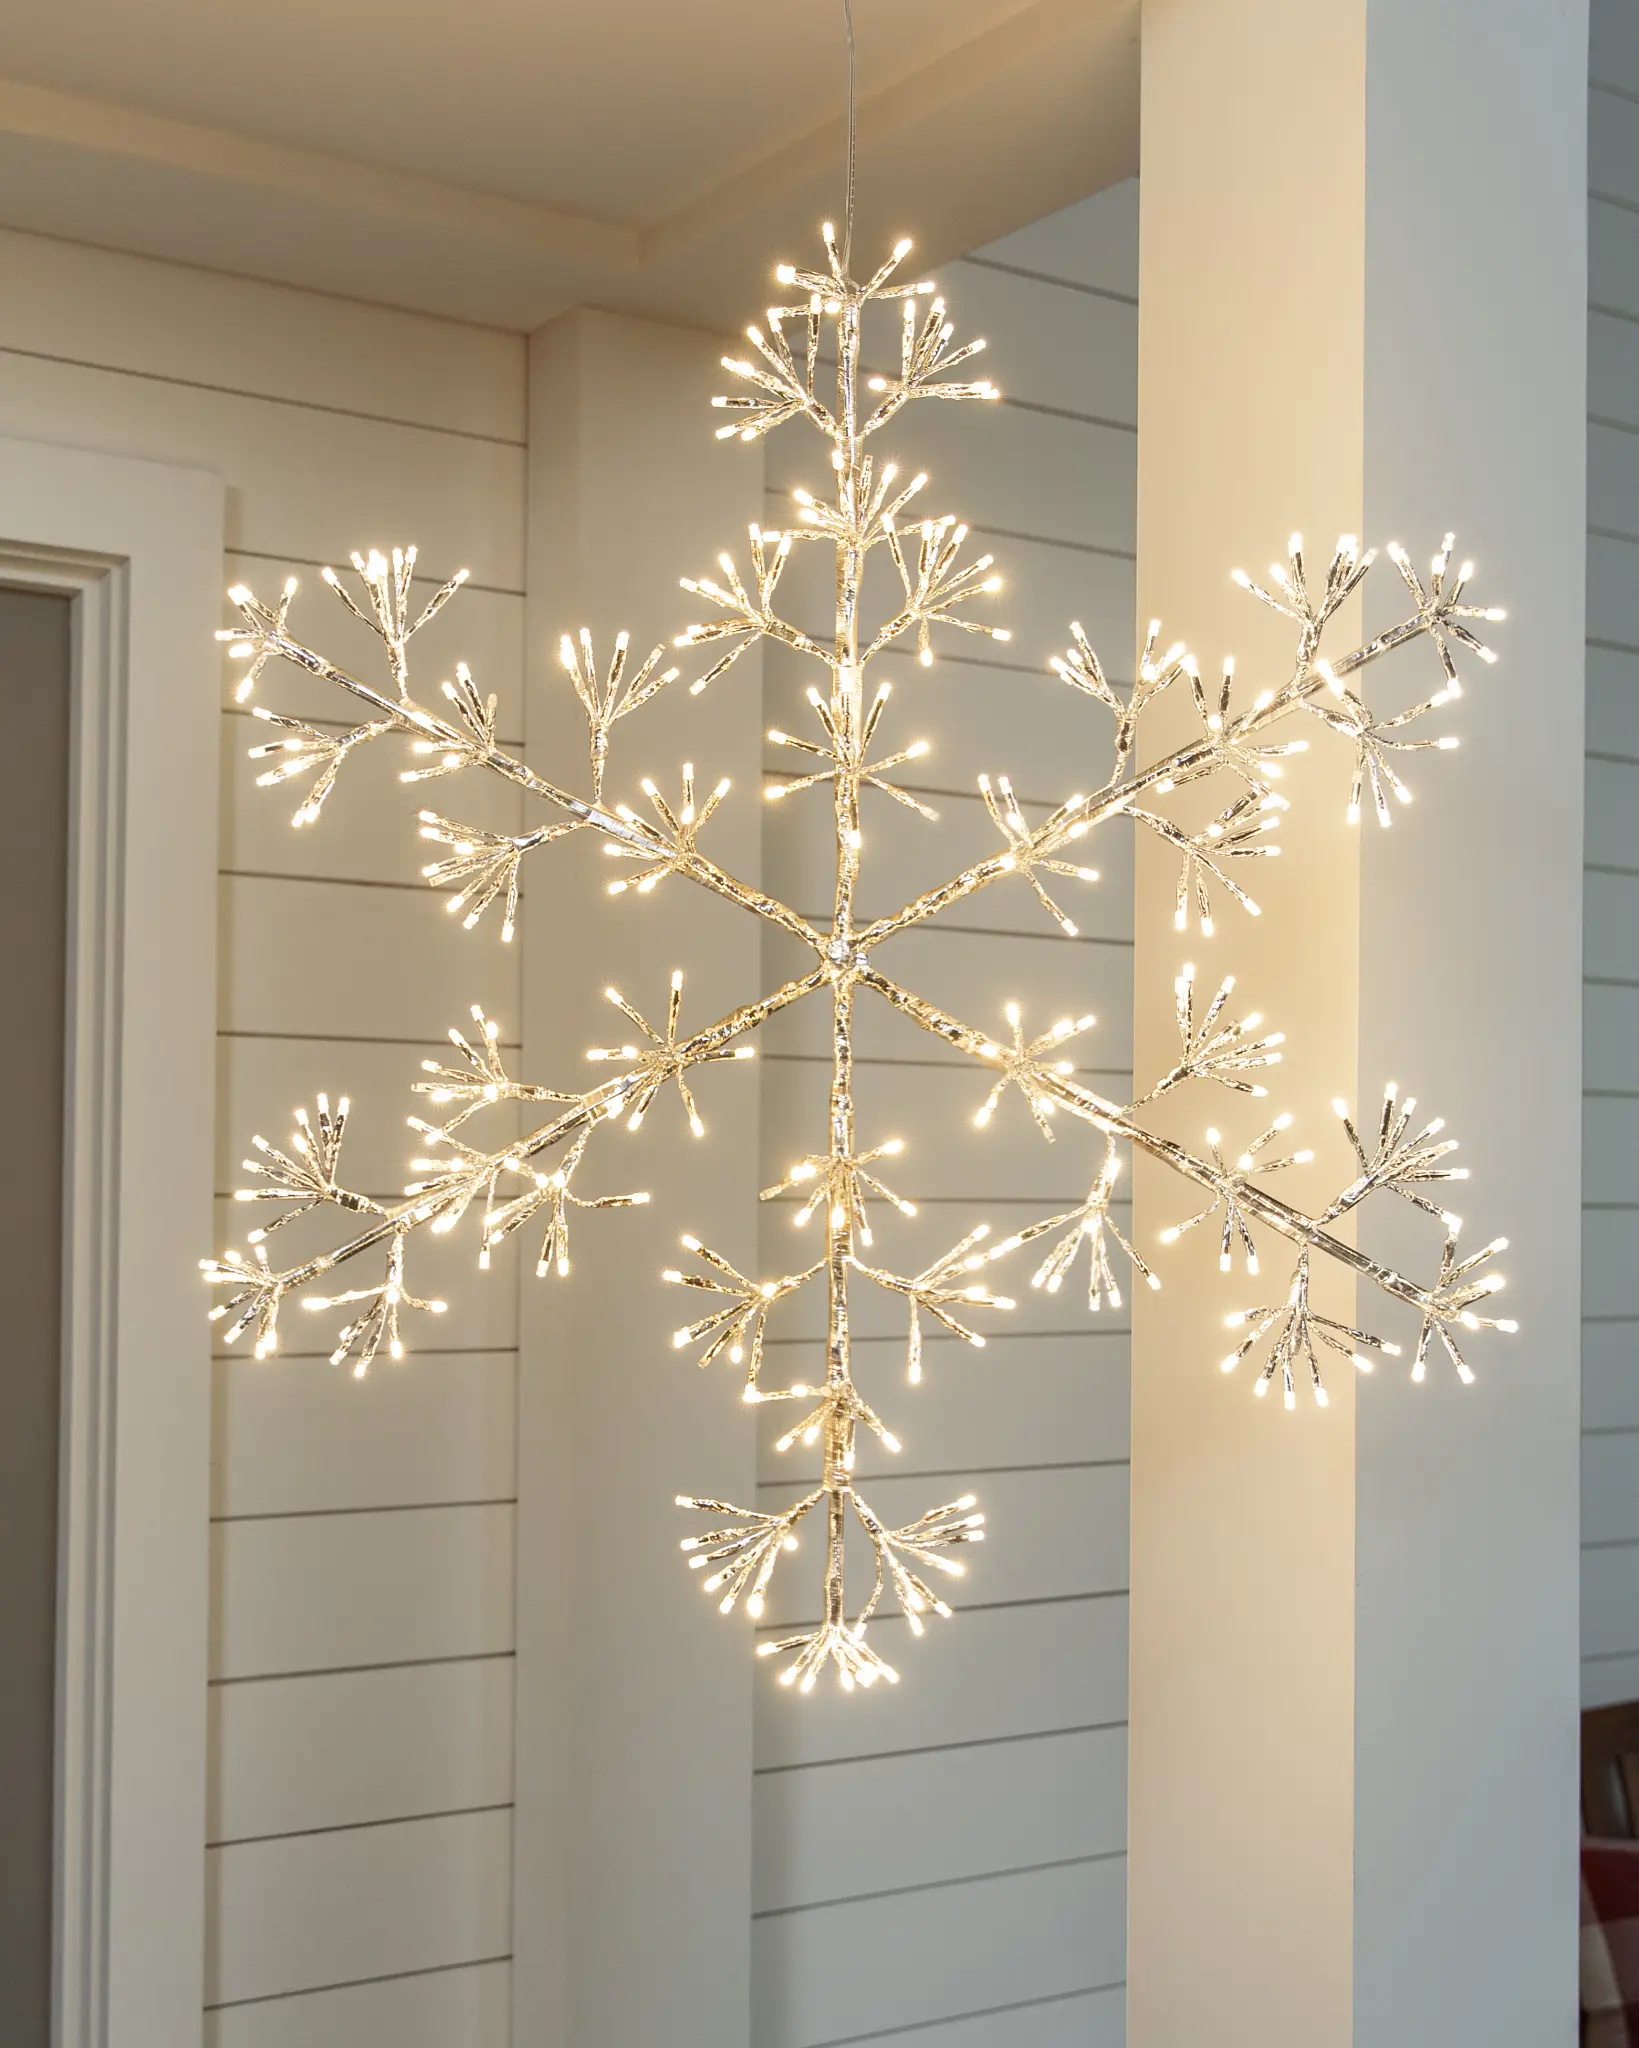 Outdoor Lit Snowflakes Christmas Decoration Balsam Hill